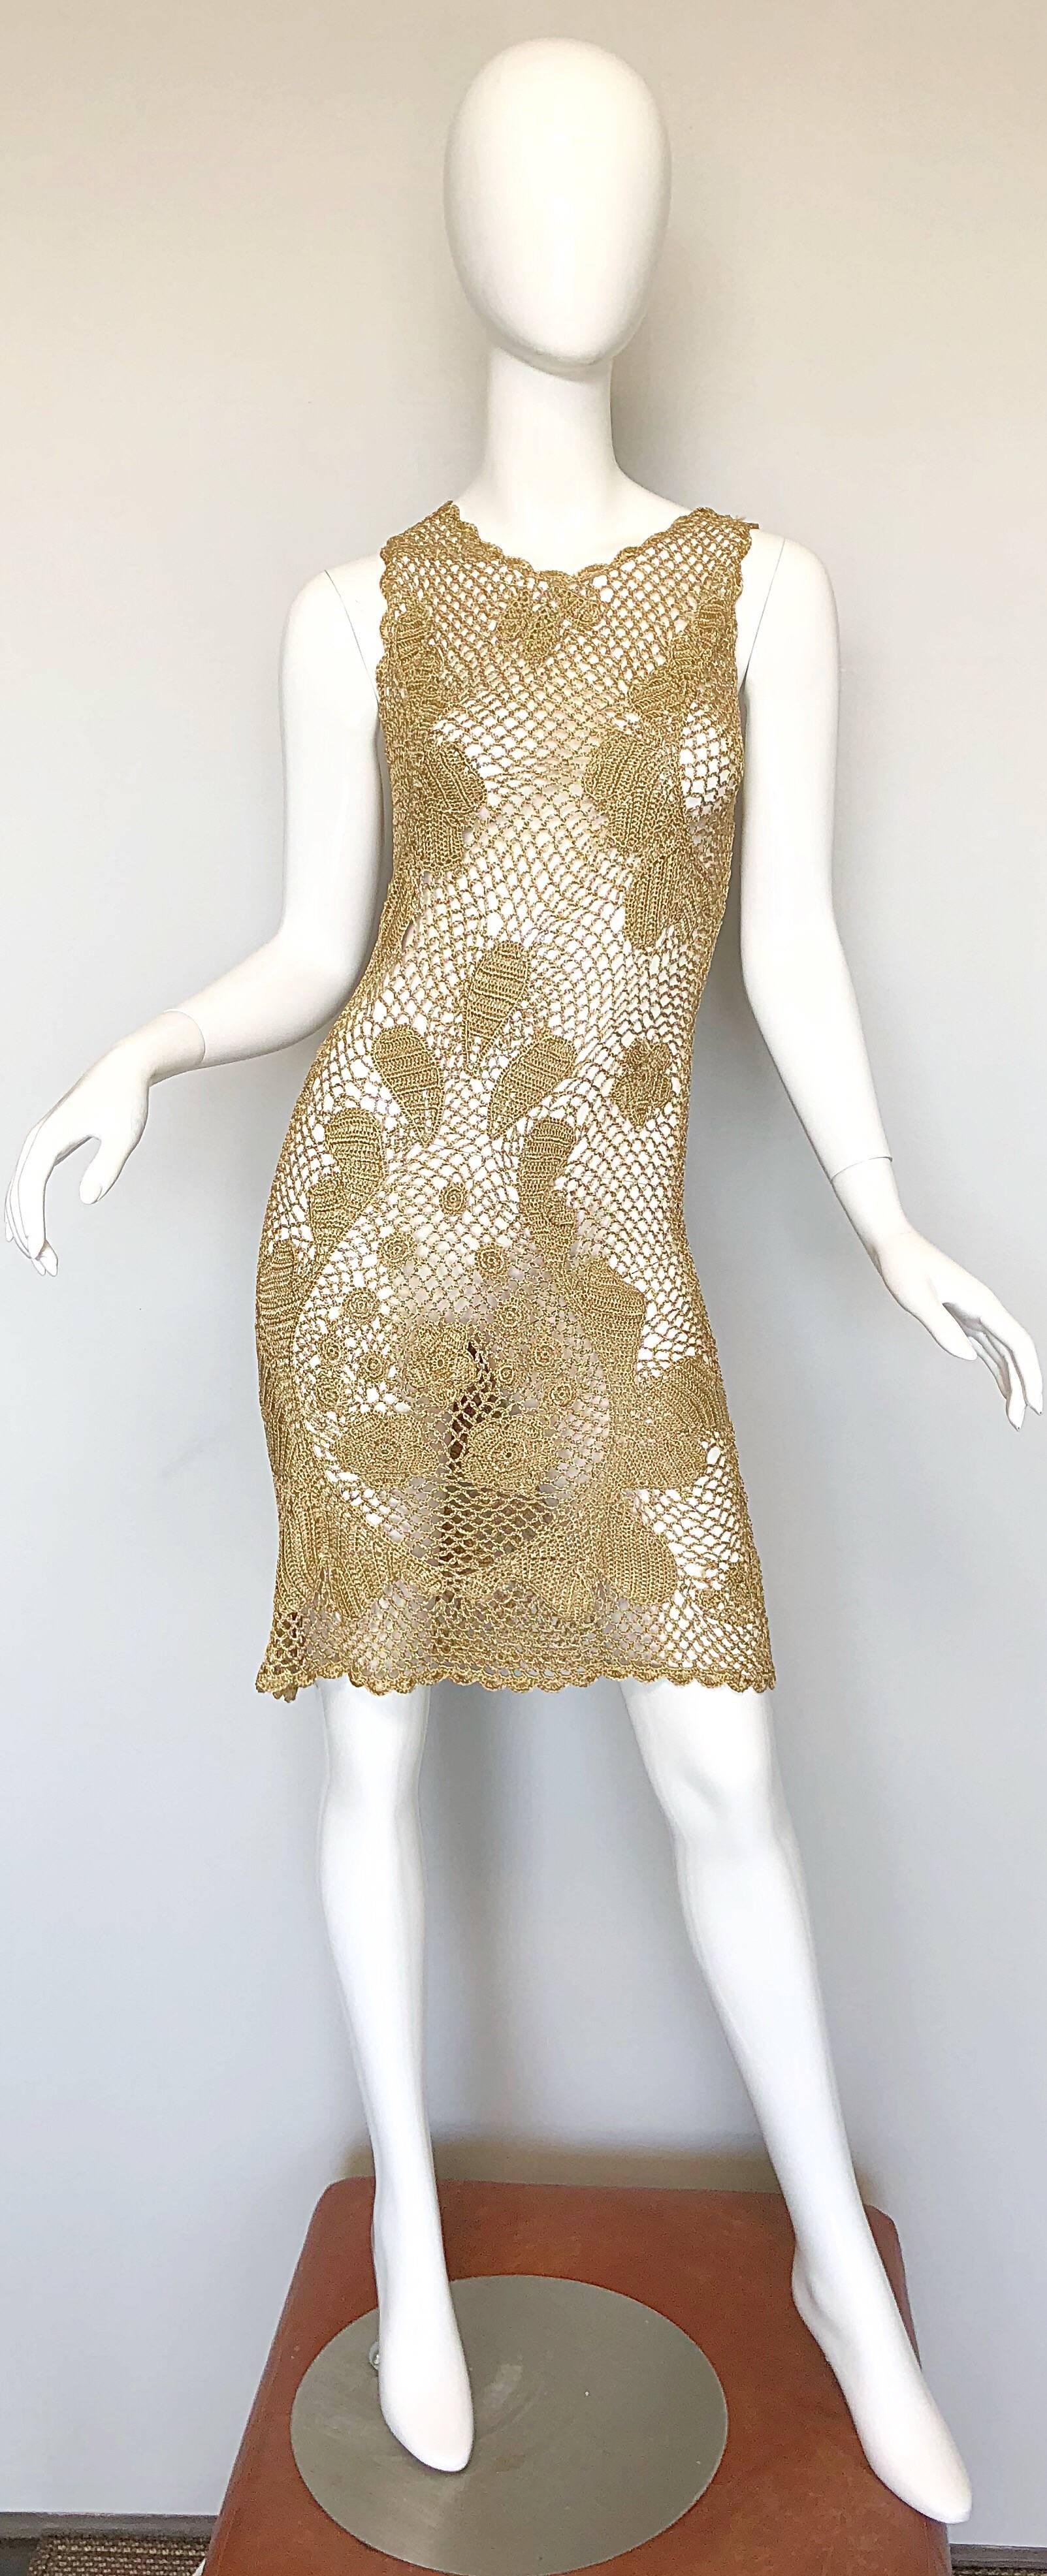 Sexy 1970s gold metallic hand crochet rayon dress! Features a soft gold metallic rayon, with designs cleverly placed over each breast, and at the crotch. Button at top back center. Great alone, over a swimsuit, with jeans, etc. In great unworn